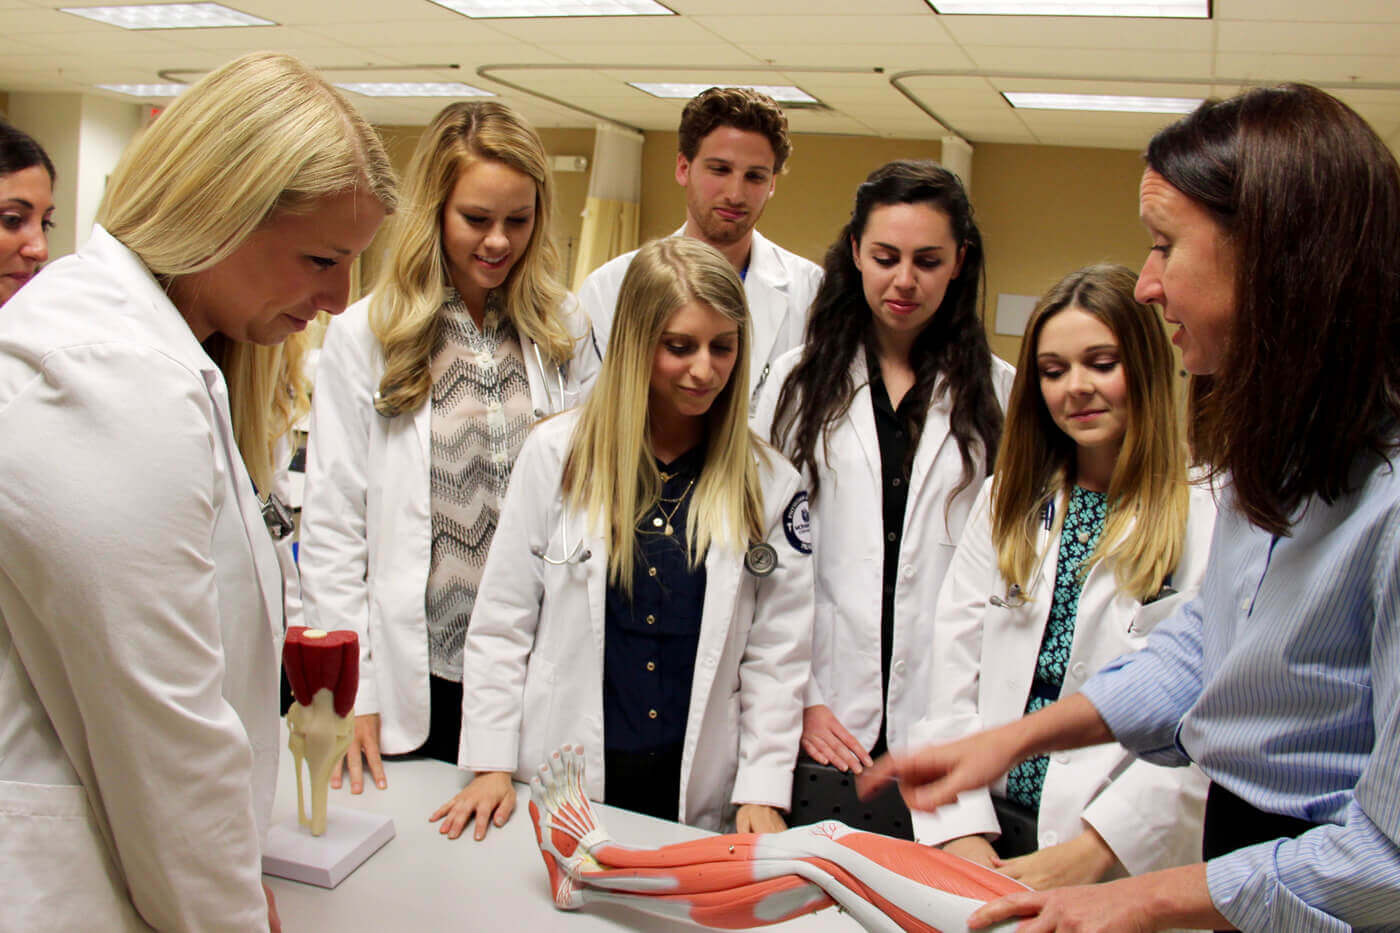 Physician assistant program students get a lesson in leg anatomy